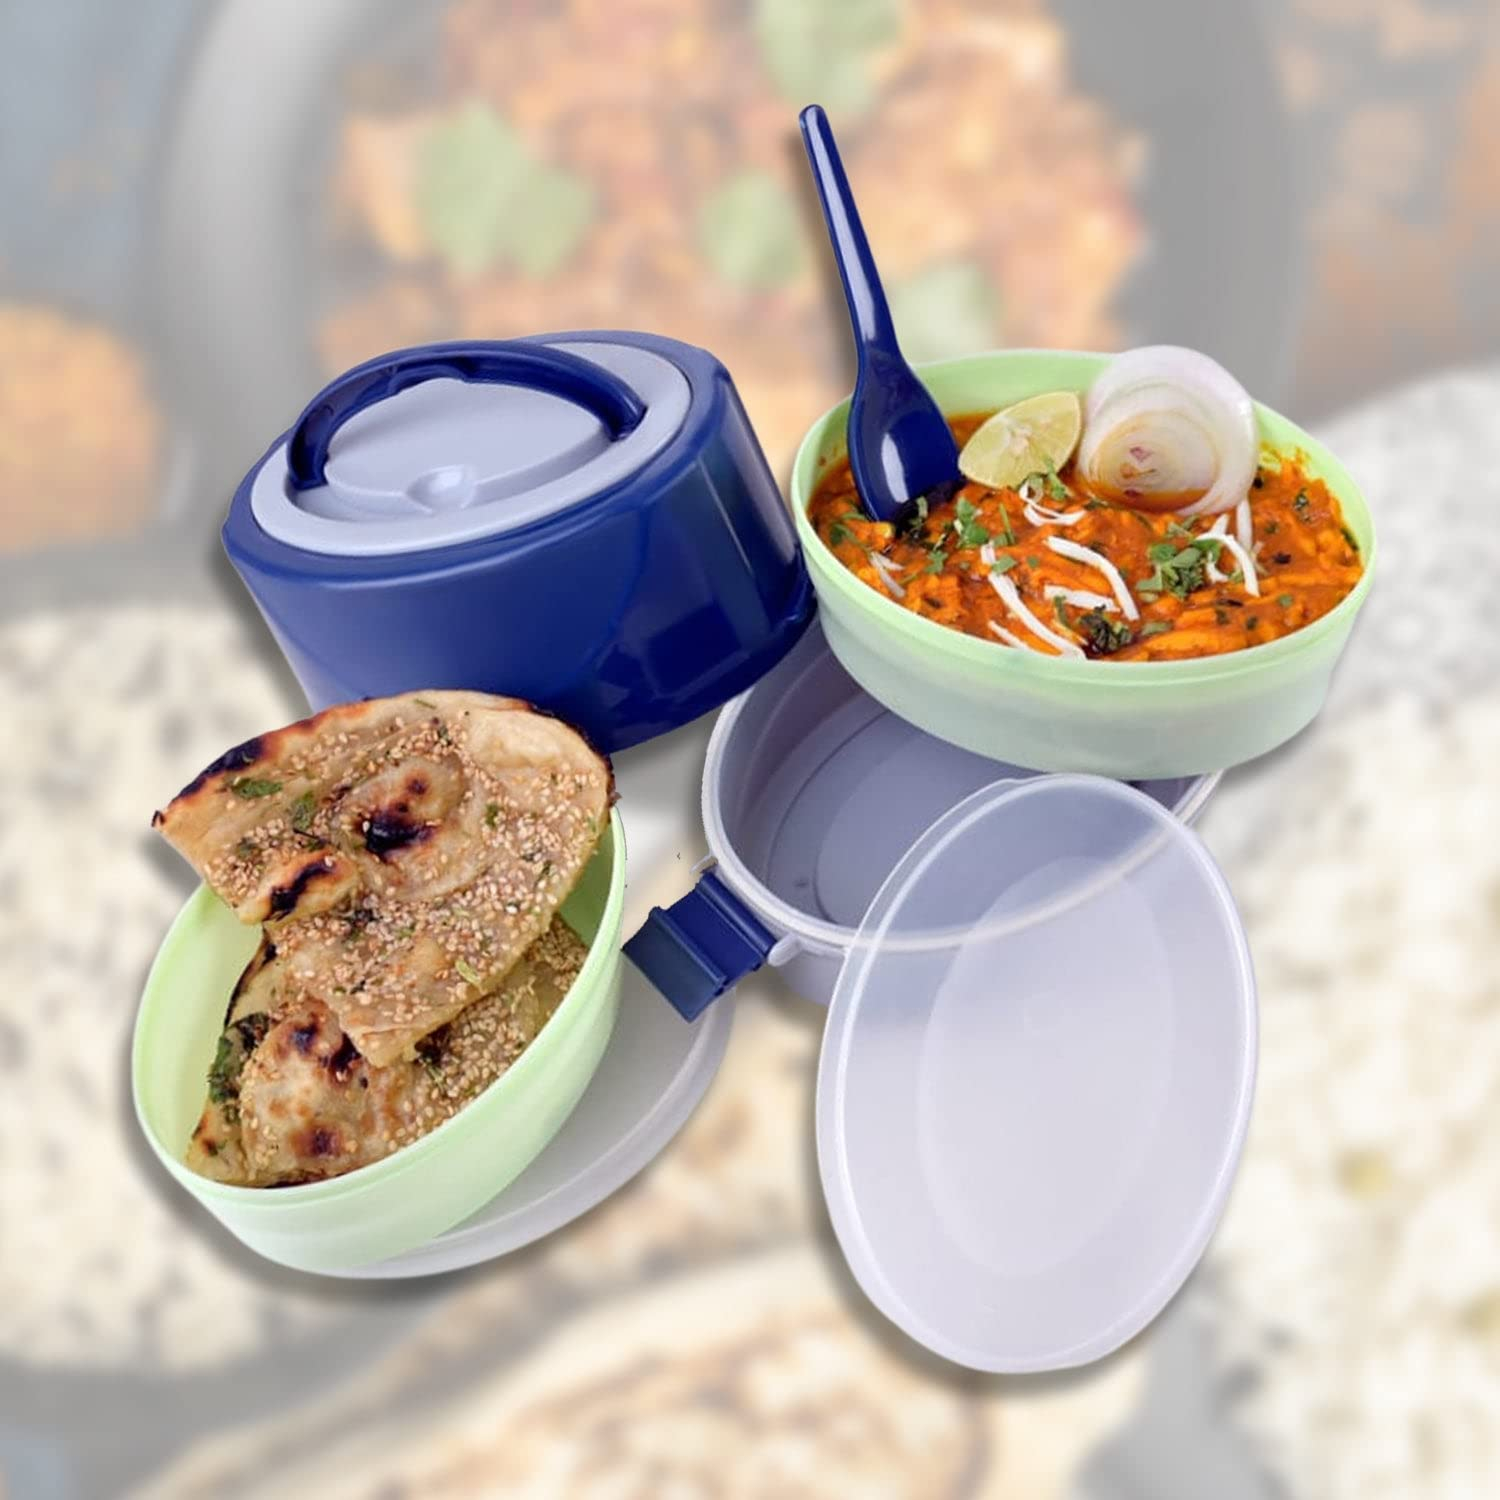 tupperware lunch box - Google Images